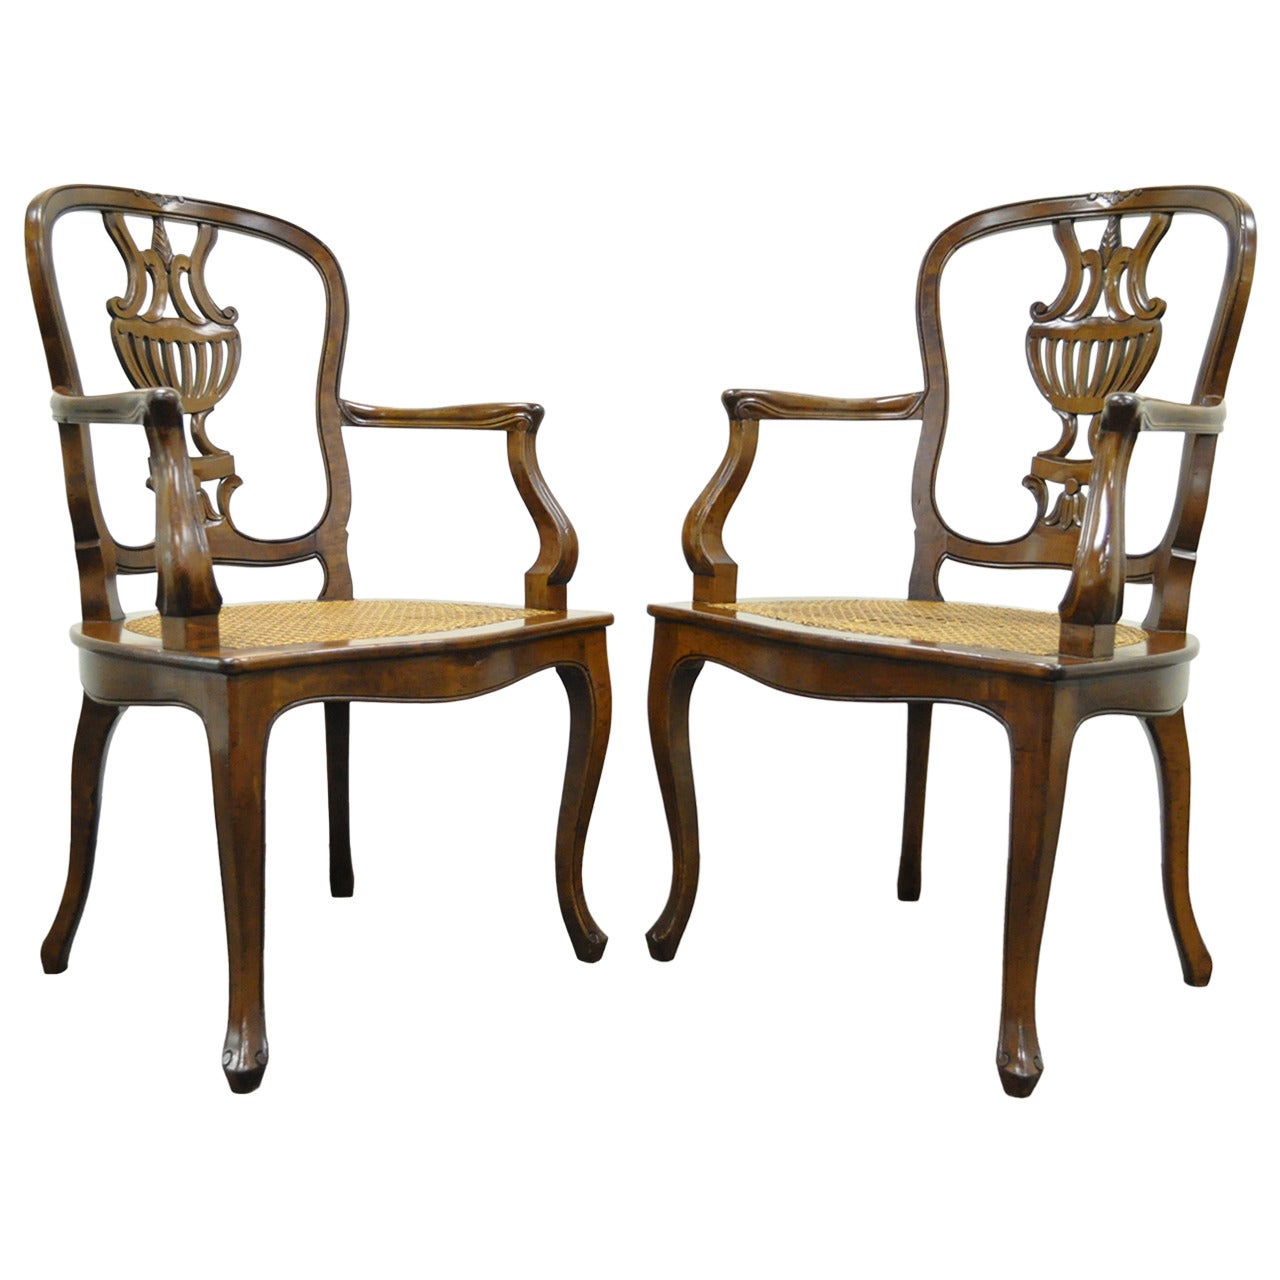 Pair of Hand-Carved Italian Venetian Cane Seat Arm Chairs in the French Taste For Sale